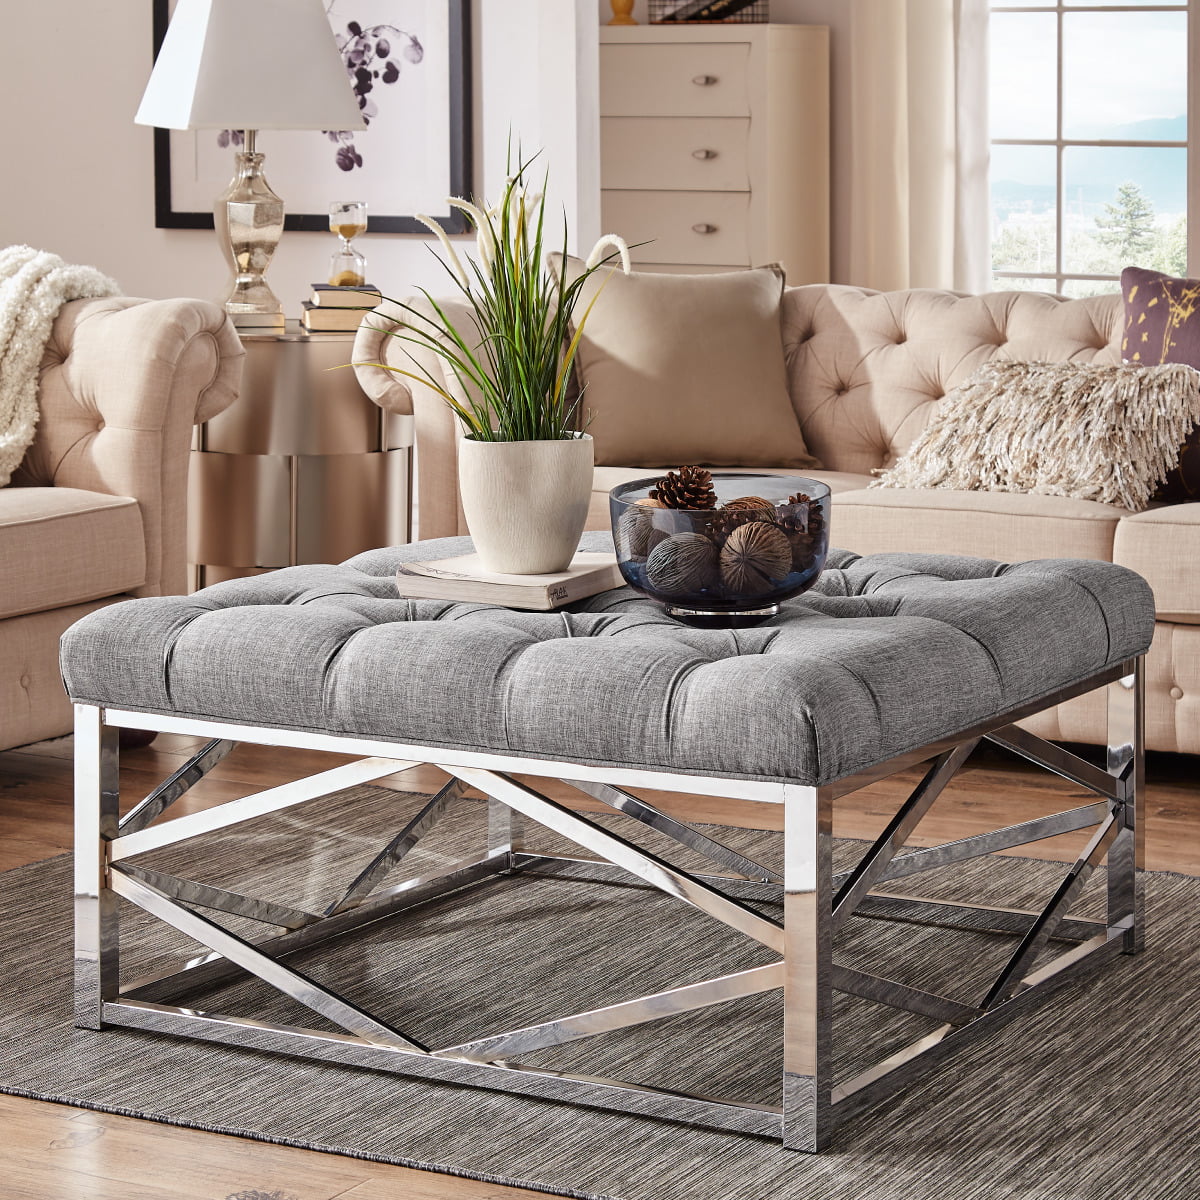 New Tufted Coffee Table with Simple Decor